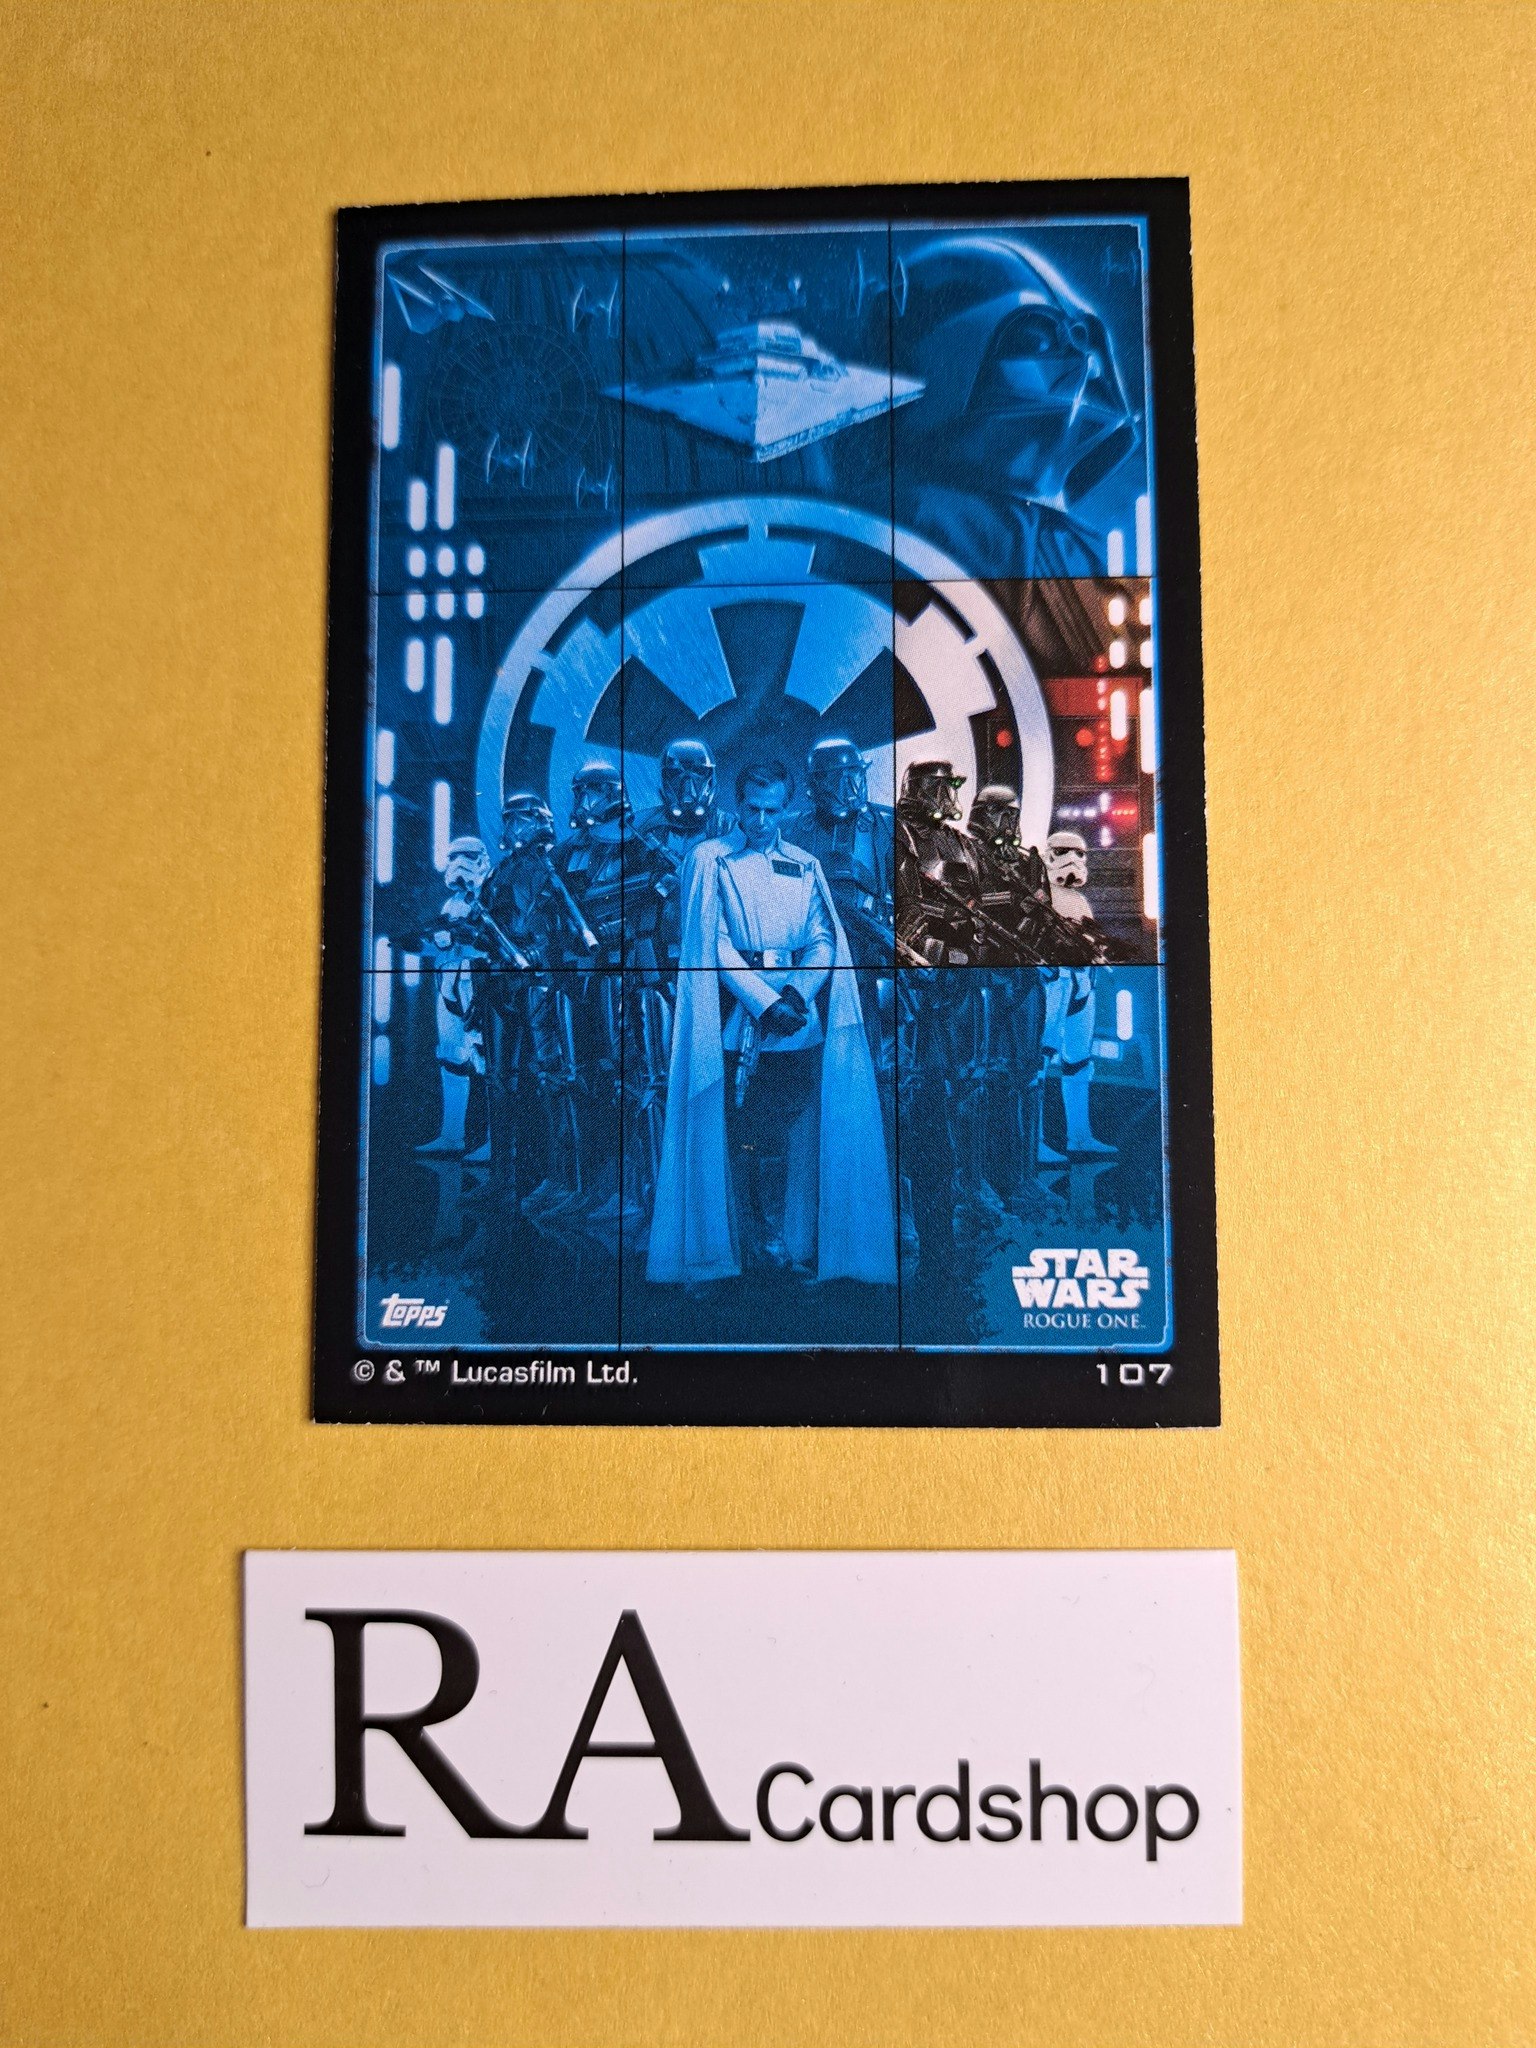 Puzzle #107 Rogue One Topps Star Wars